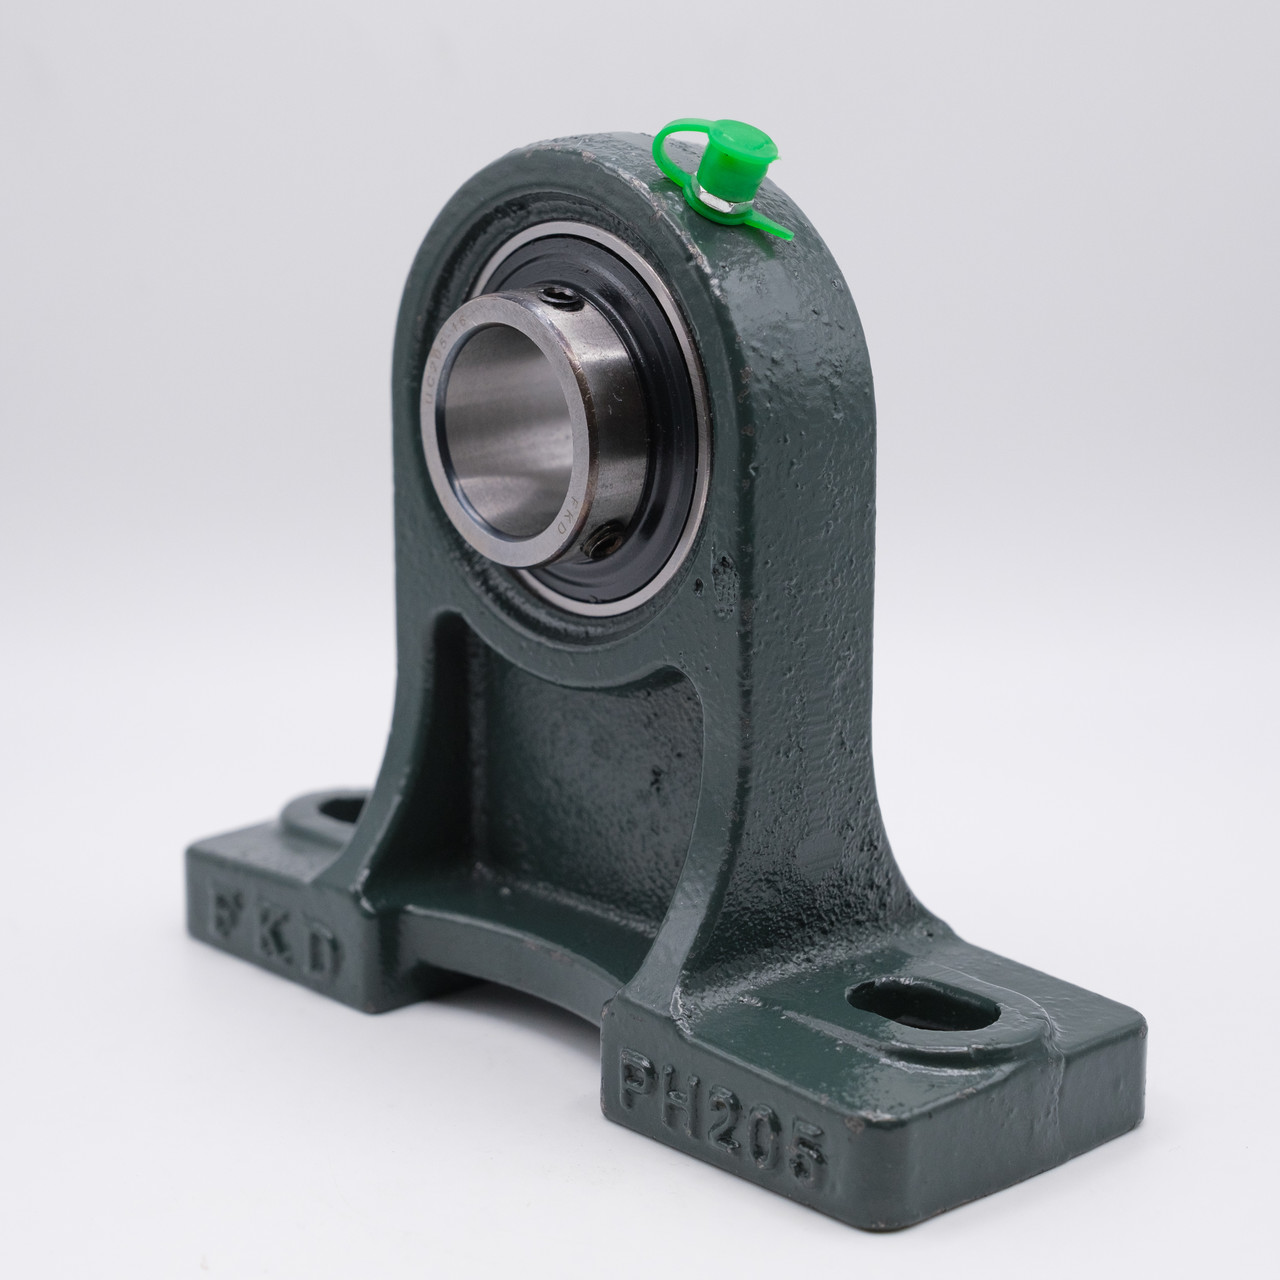 UCPH201 GENERIC 12mm Normal duty 2 Bolt Cast Iron Pillow Block Housed Unit Bearing with extended base to centre height - Metric Thumbnail